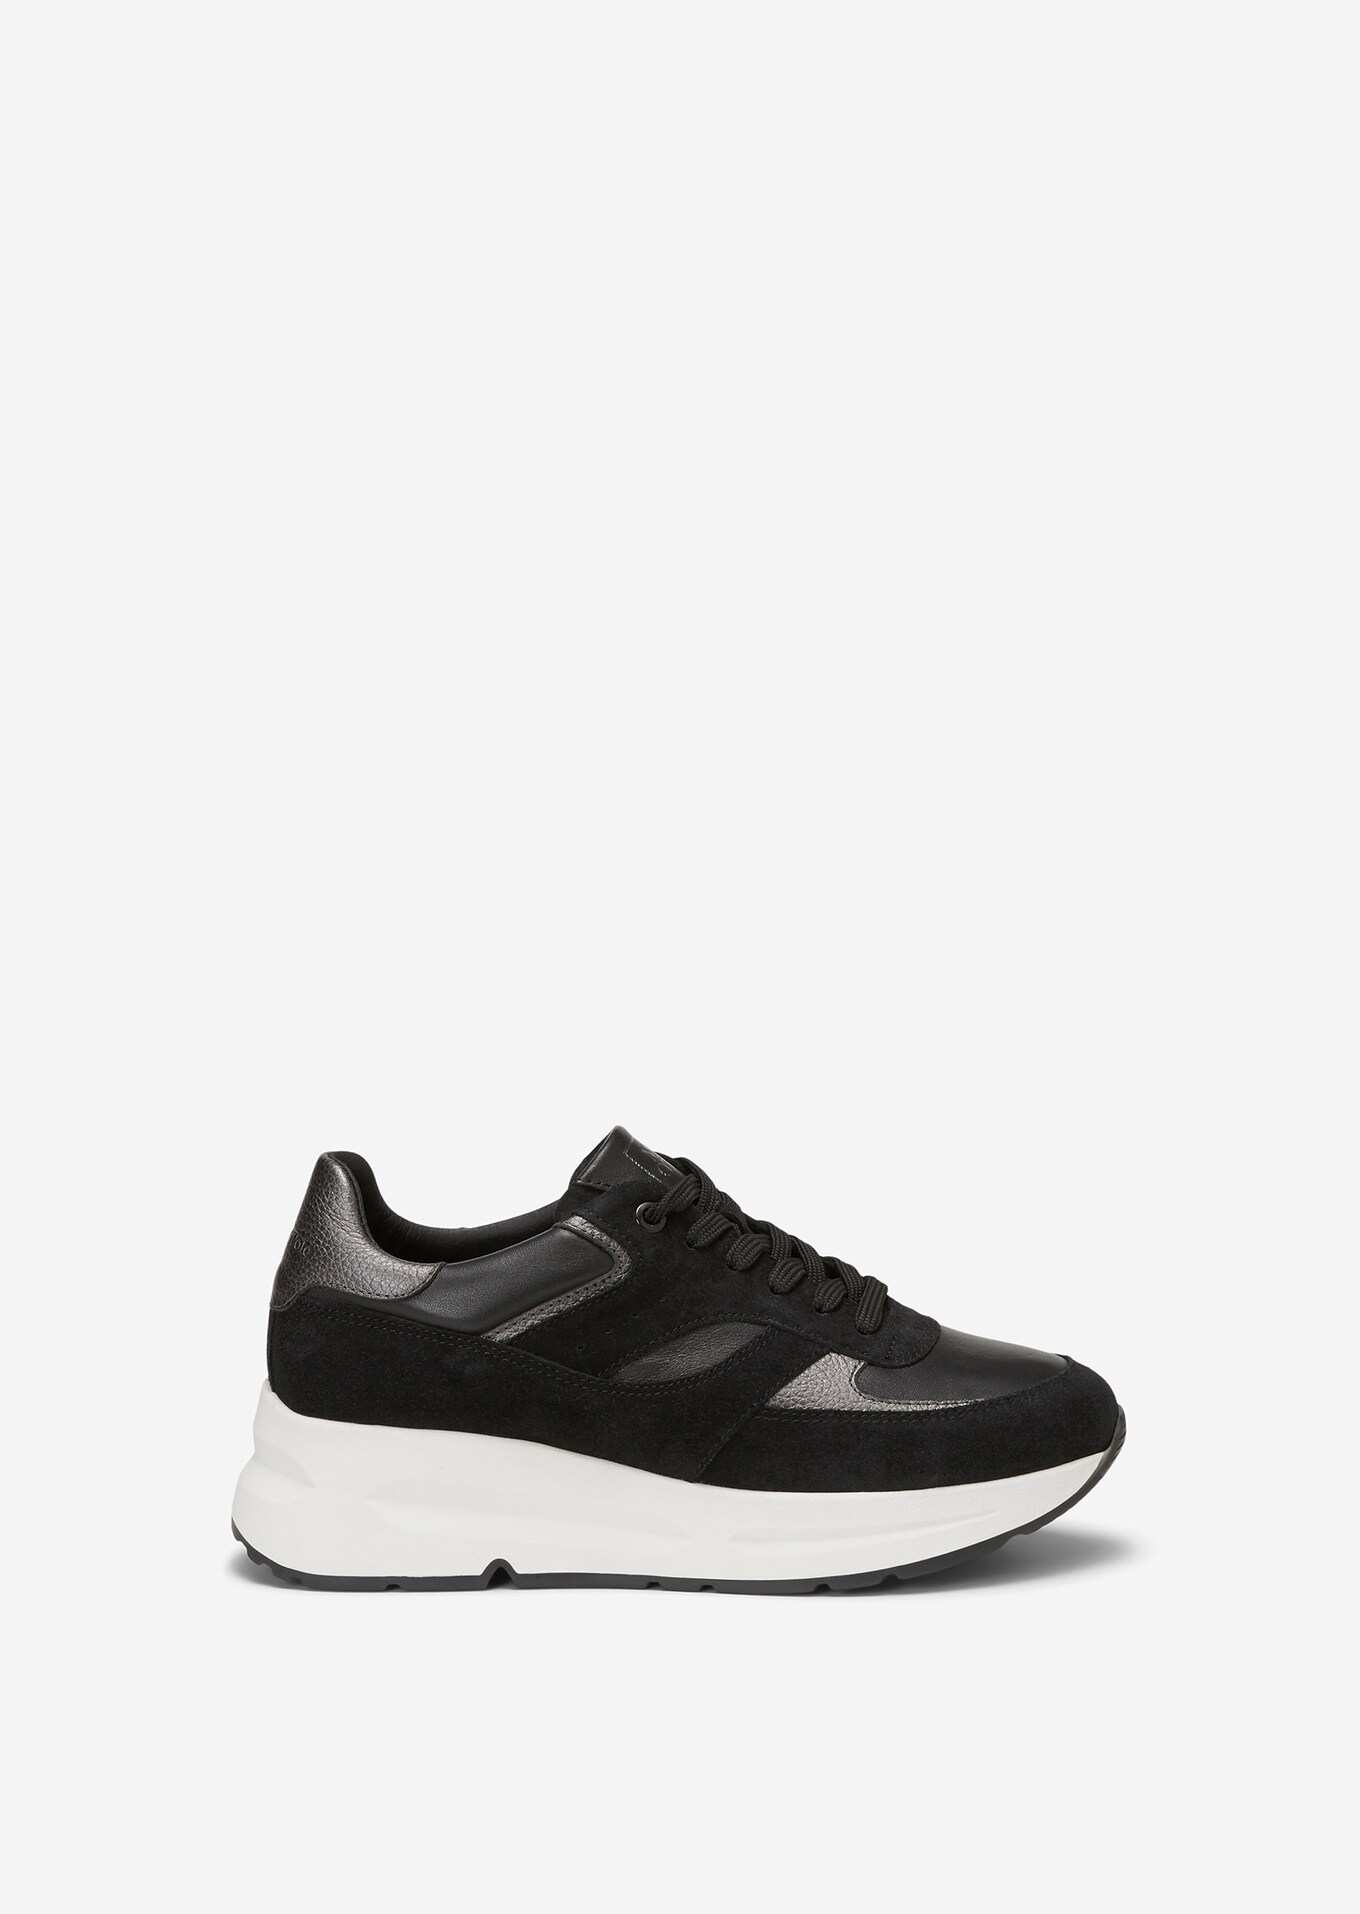 Bulky trainers in warm shades of colour - black | Sneakers | MARC O’POLO